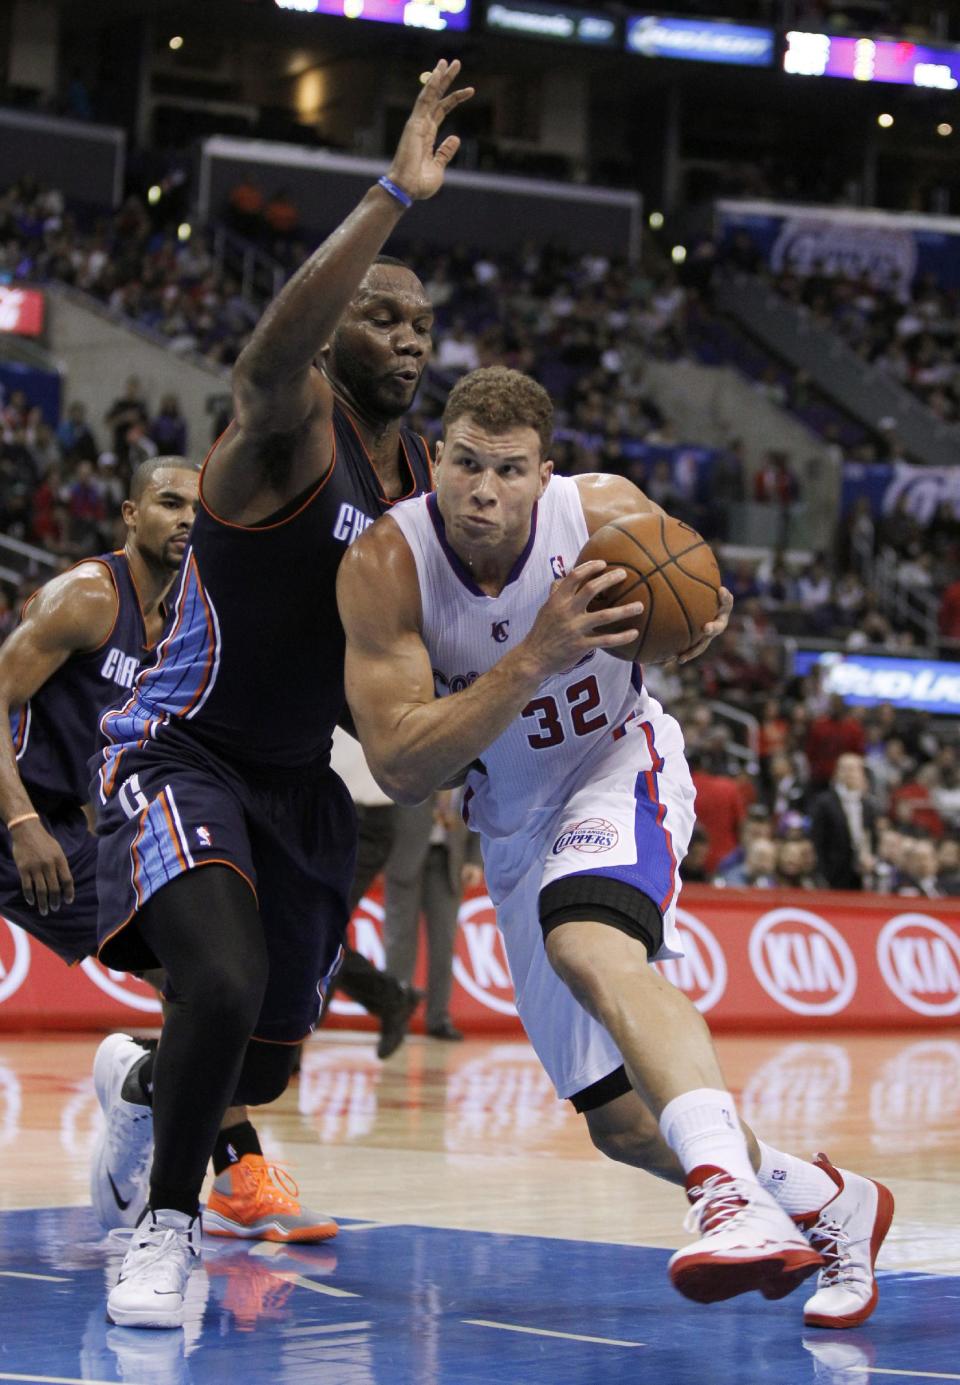 Los Angeles Clippers forward Blake Griffin (32) drives to the basket against Charlotte Bobcats center Al Jefferson during the first half of an NBA basketball game Wednesday, Jan. 1, 2014, in Los Angeles. (AP Photo/Alex Gallardo)